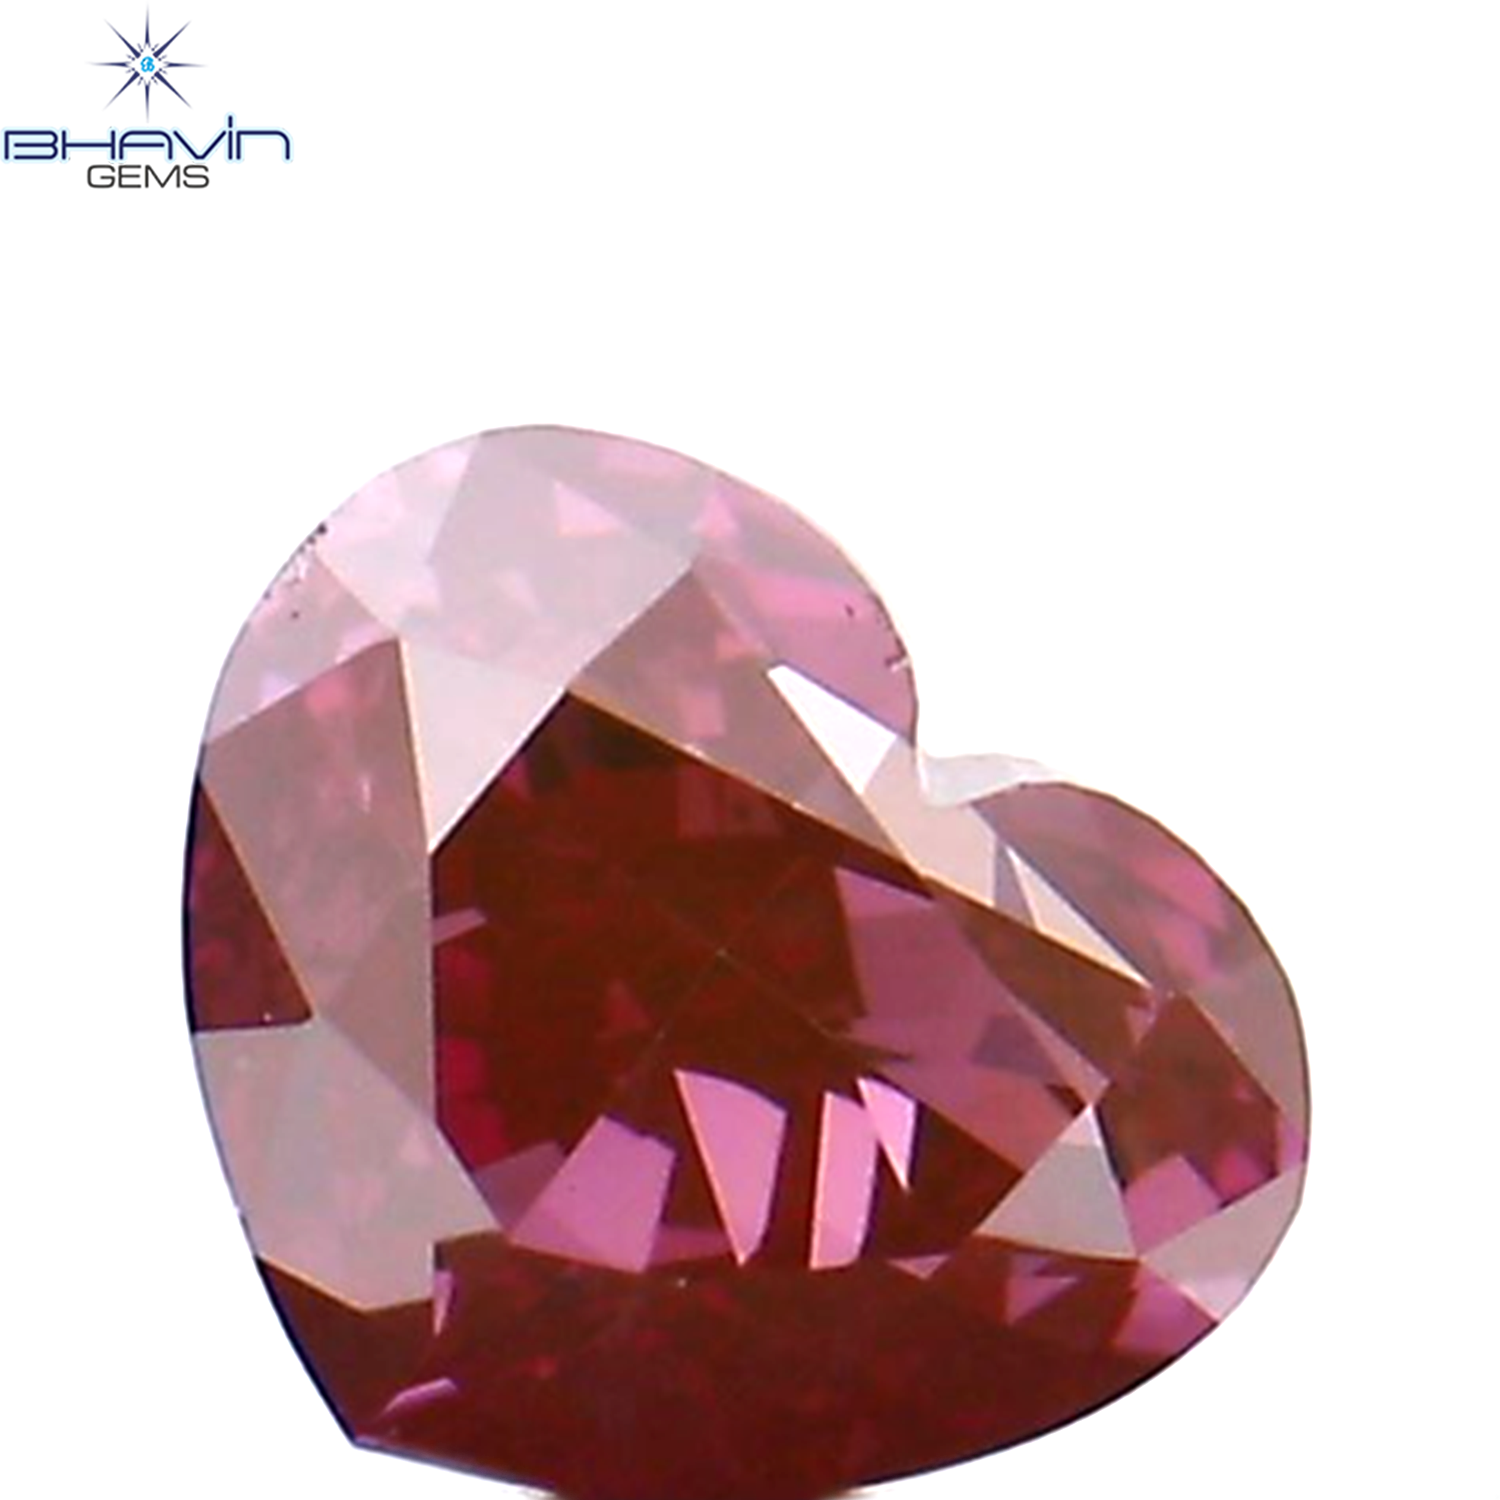 0.20 CT Heart Shape Pink Color Natural Loose Diamond VS1 Clarity (3.73 MM)